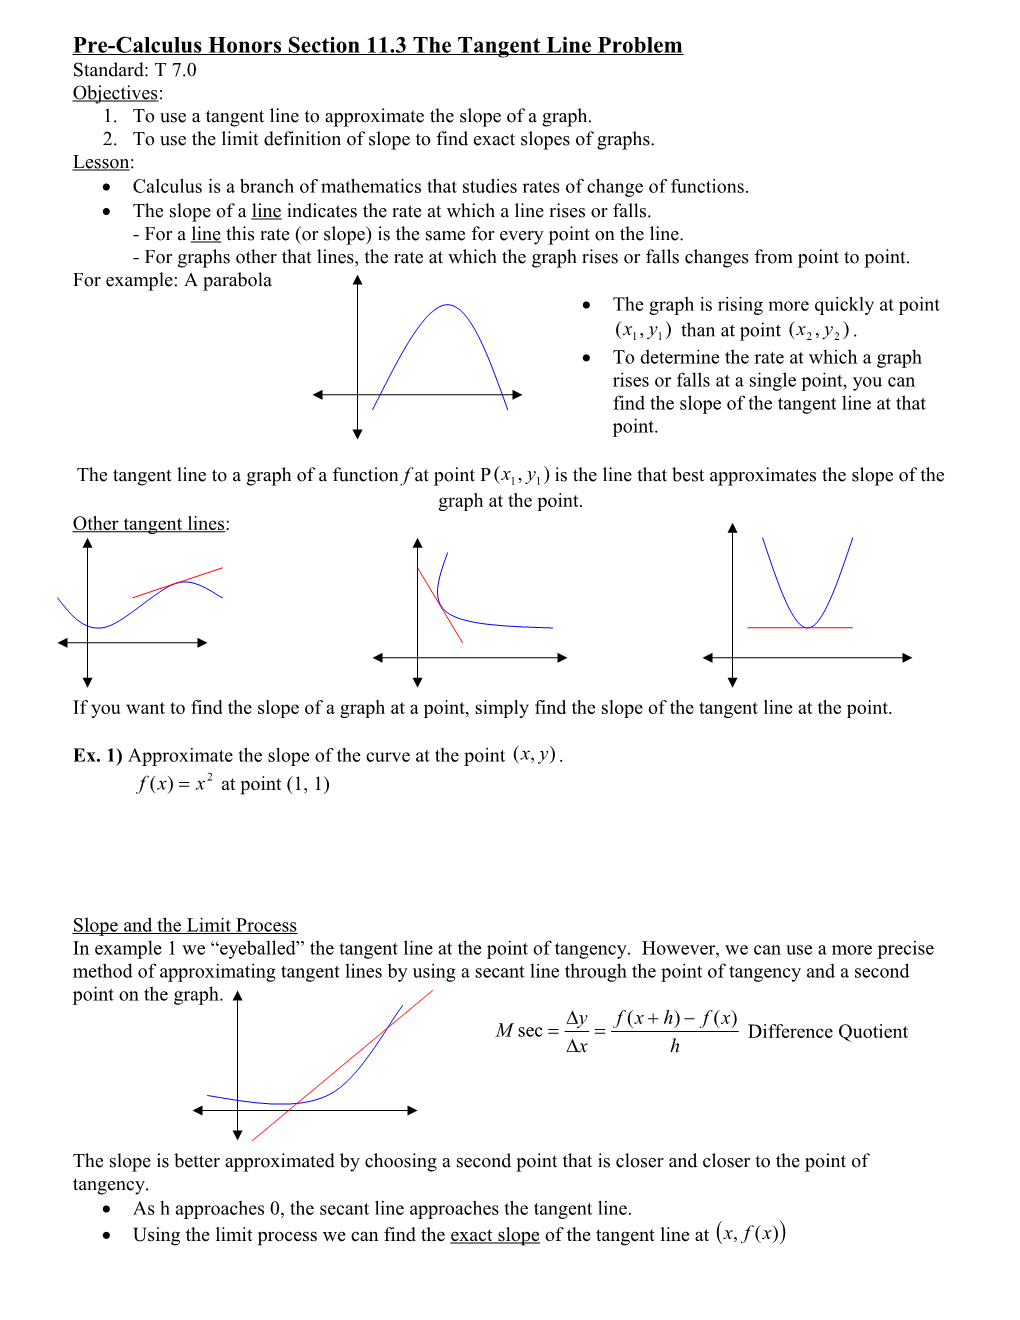 Pre-Calculus Honors Section 11.3 the Tangent Line Problem